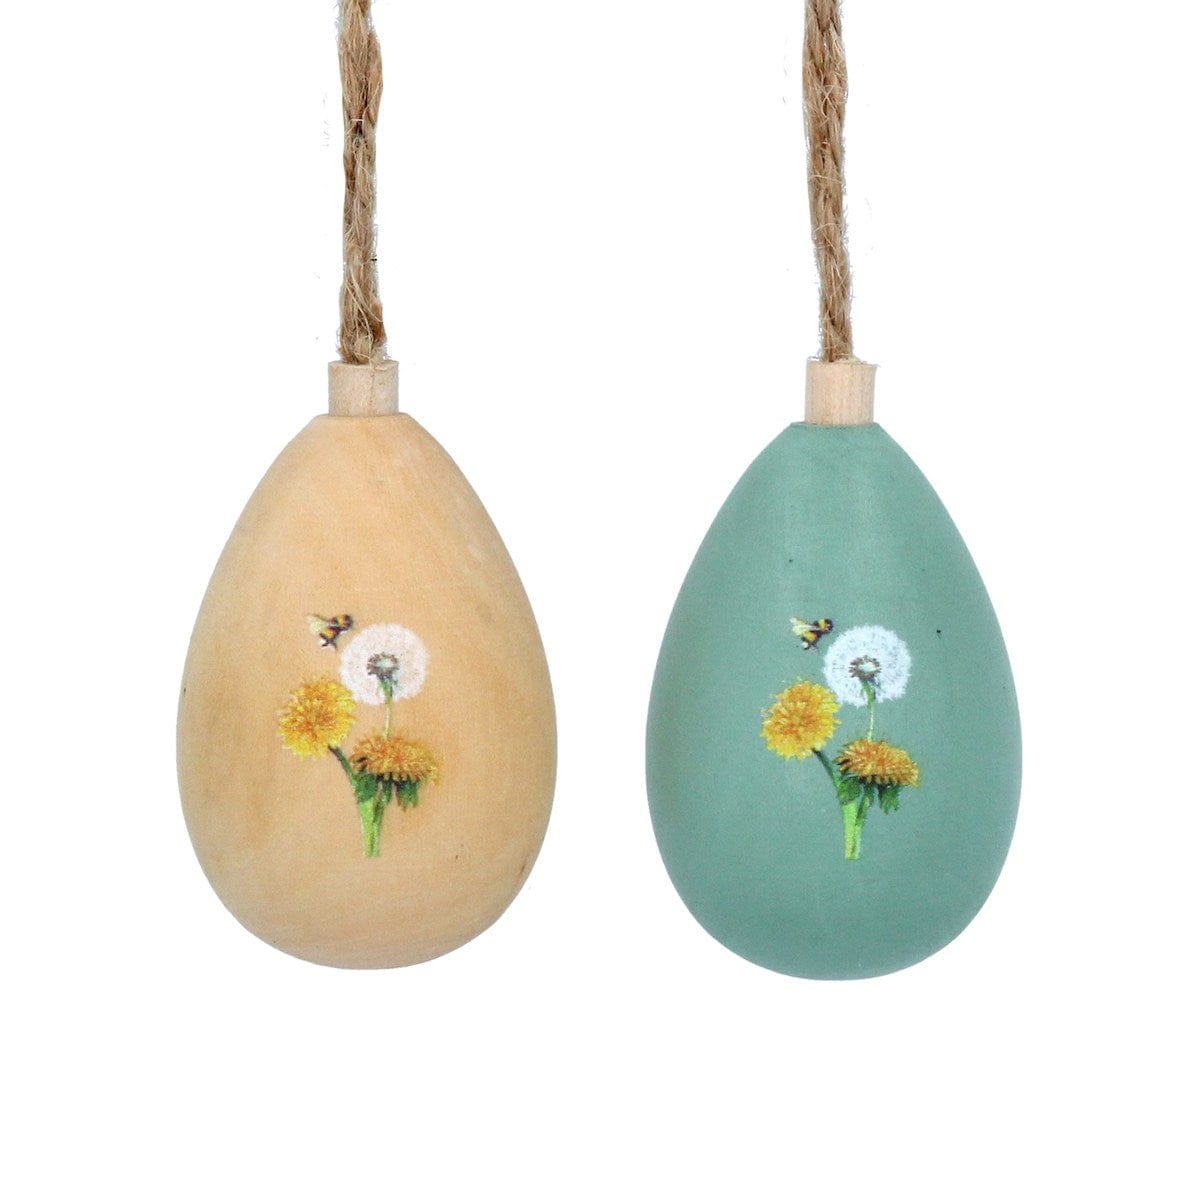 Gisela Graham Easter Easter Decorations Set of Two Wooden Dandelion and Bee Easter Egg Decorations